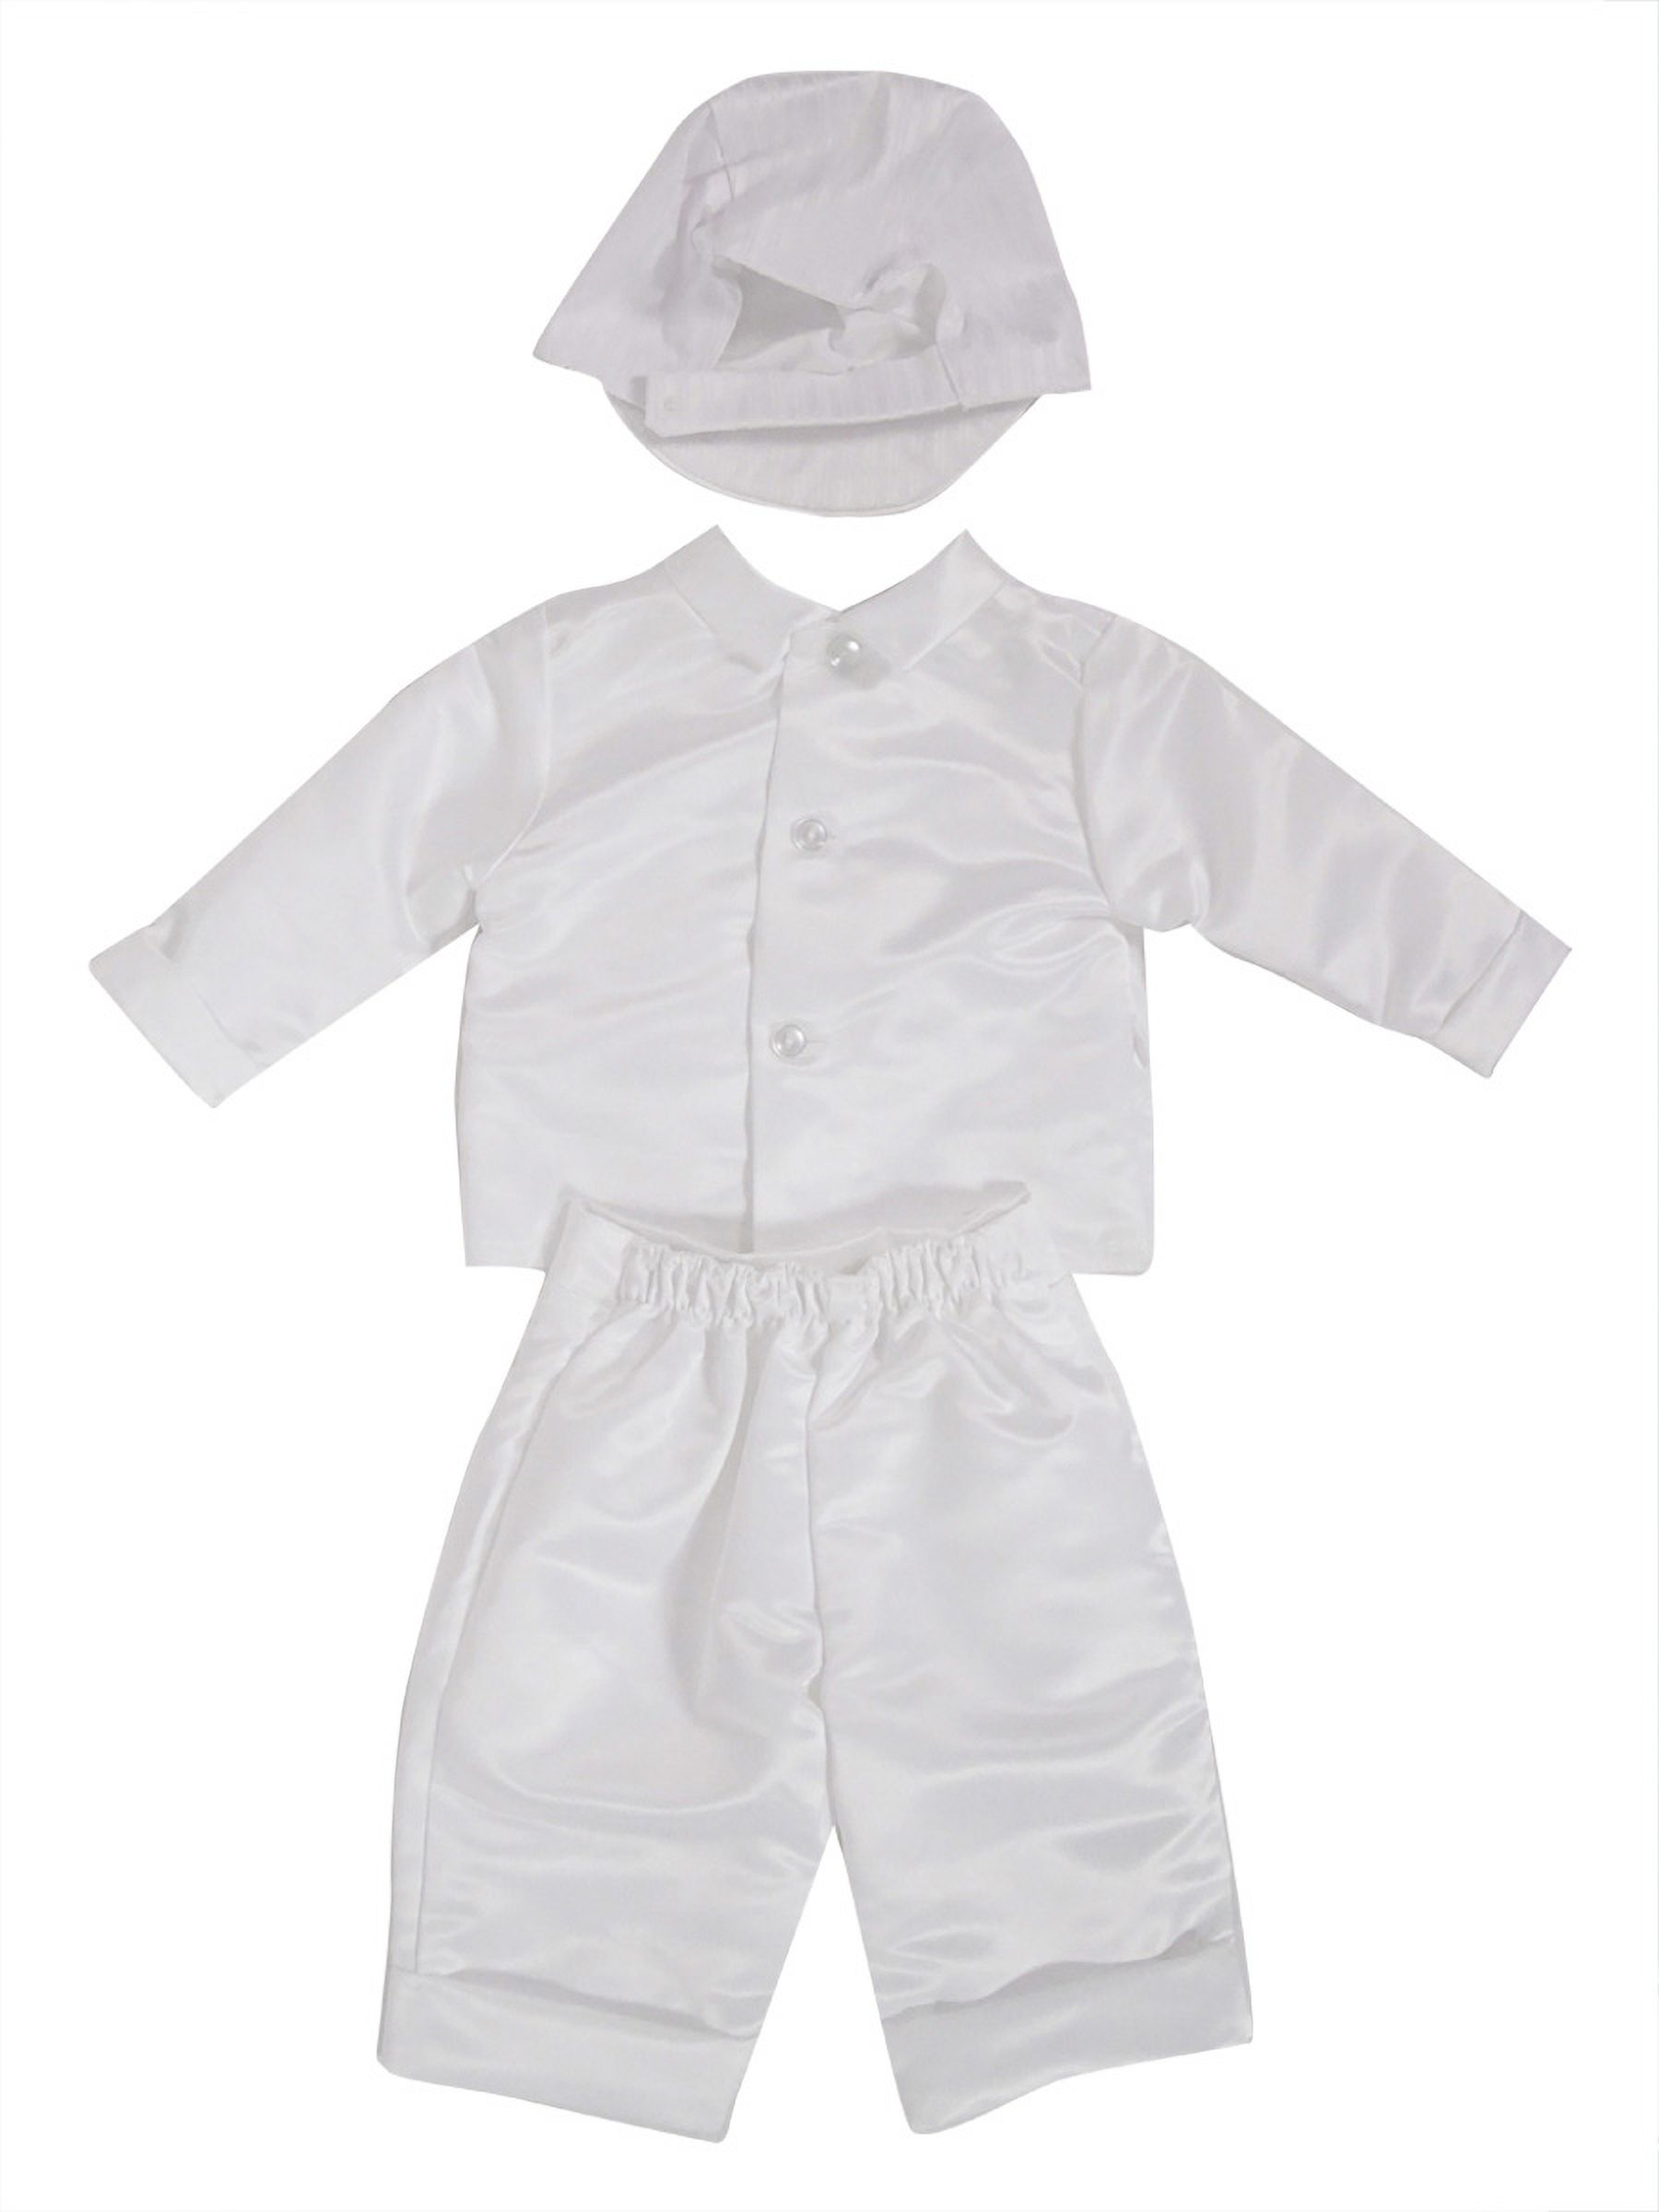 Lauren Madison Boy's Satin Christening Outfit with Hat and Tie White Size 6-9MOS - image 2 of 2